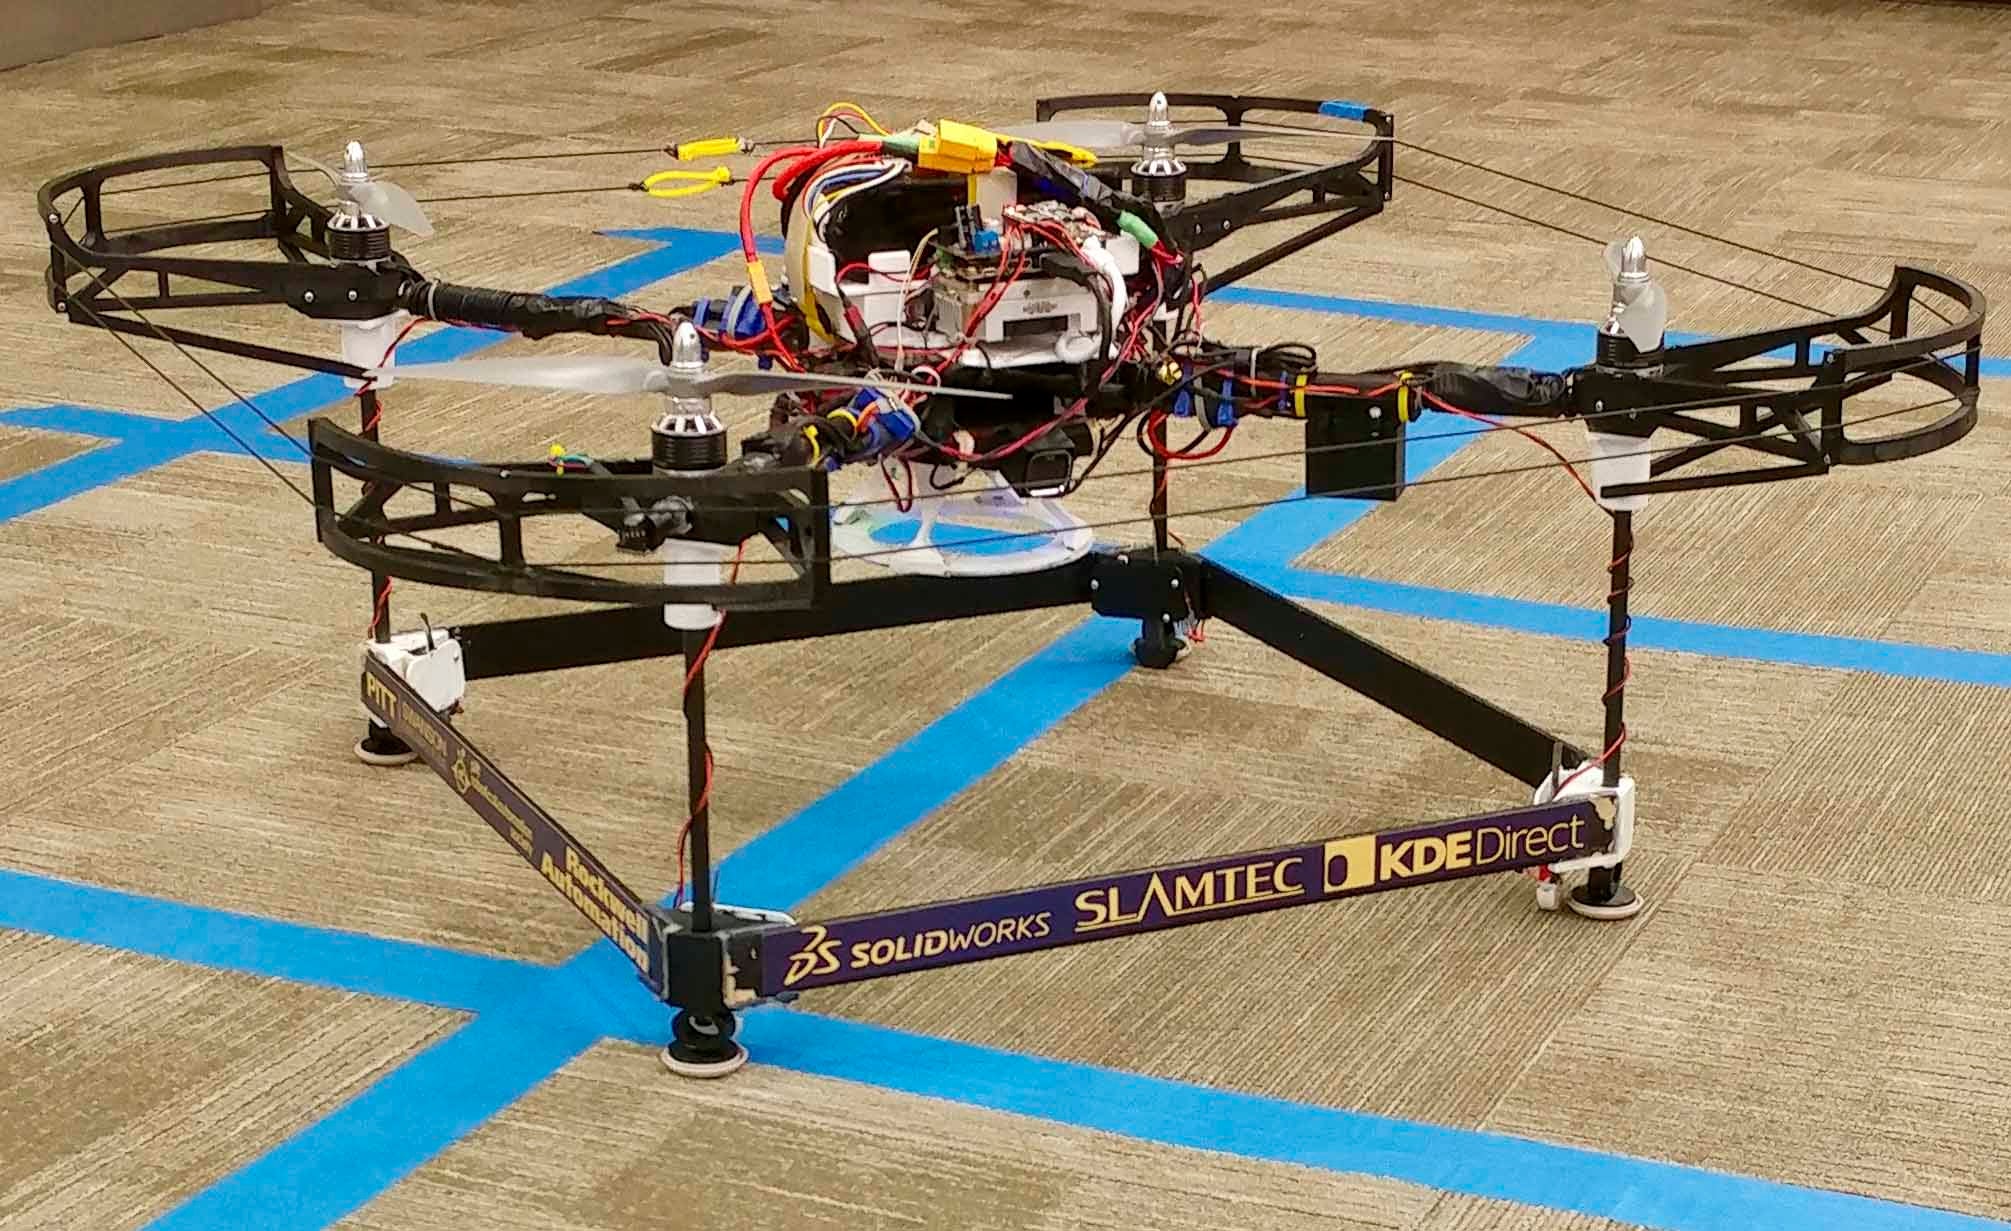 the drone, on a brown and blue carpet